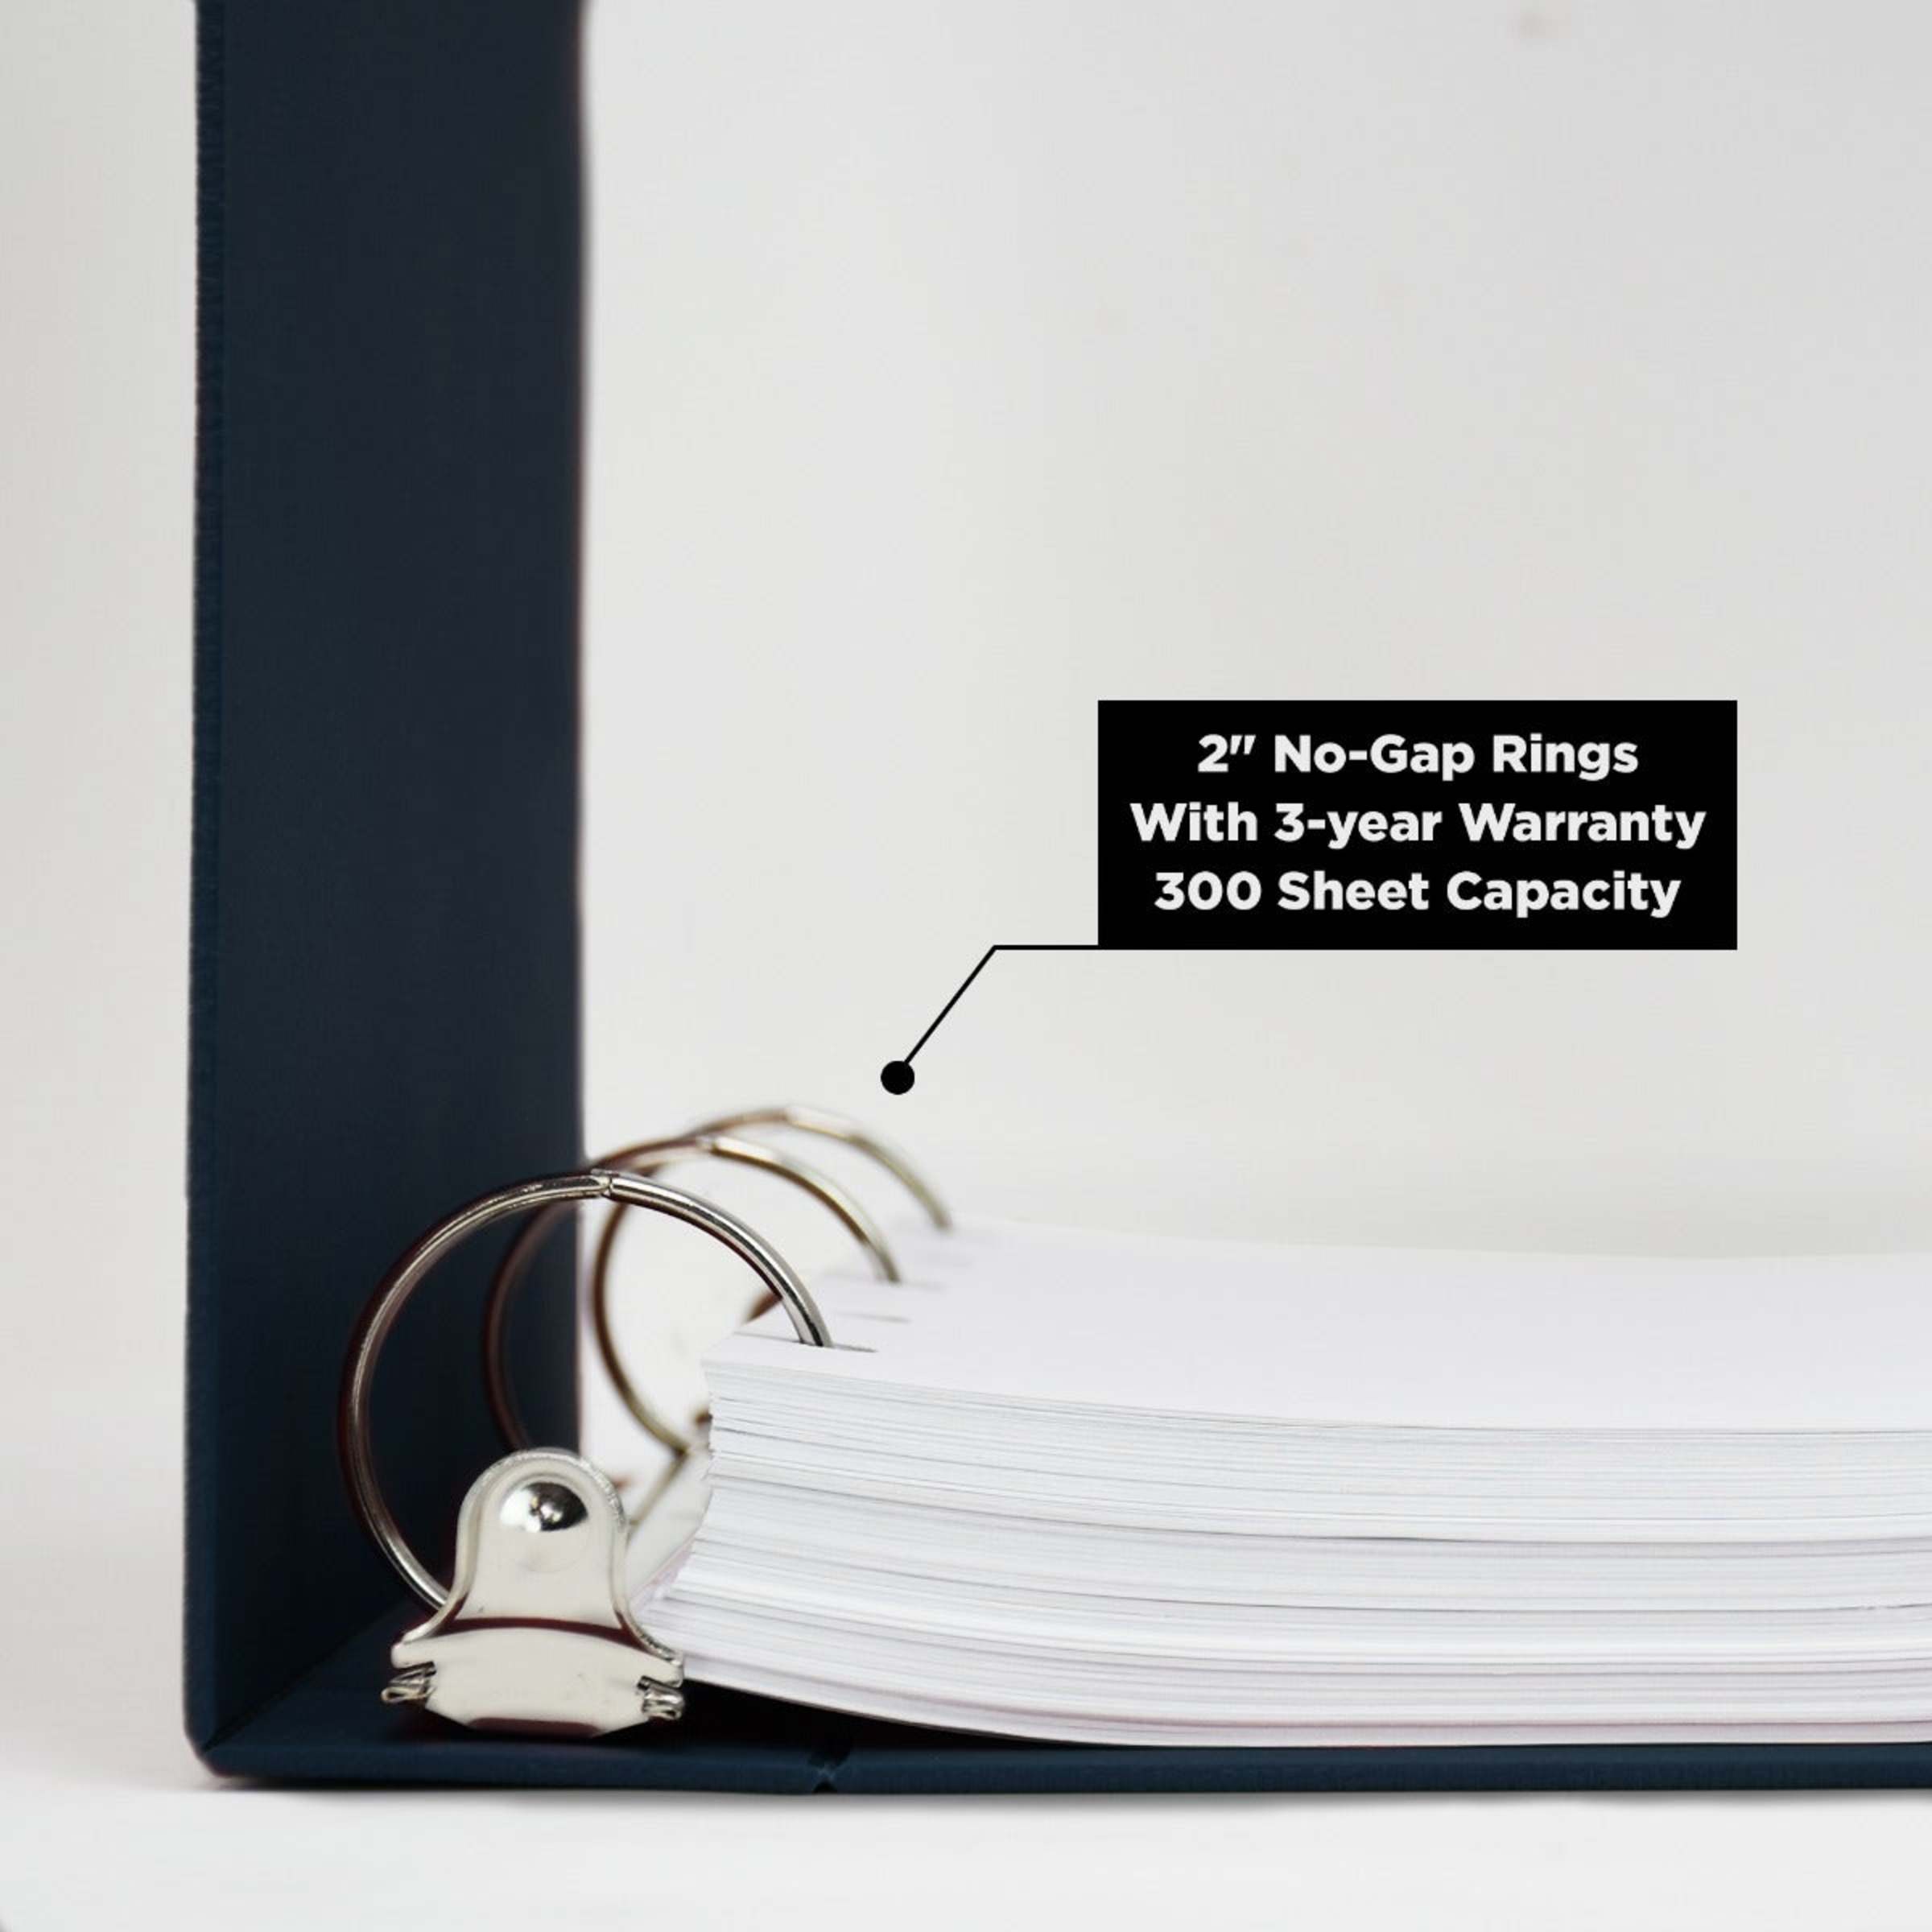 2-Inch Heavy Duty 3-Ring Binder for Medical Charting – Side Opening